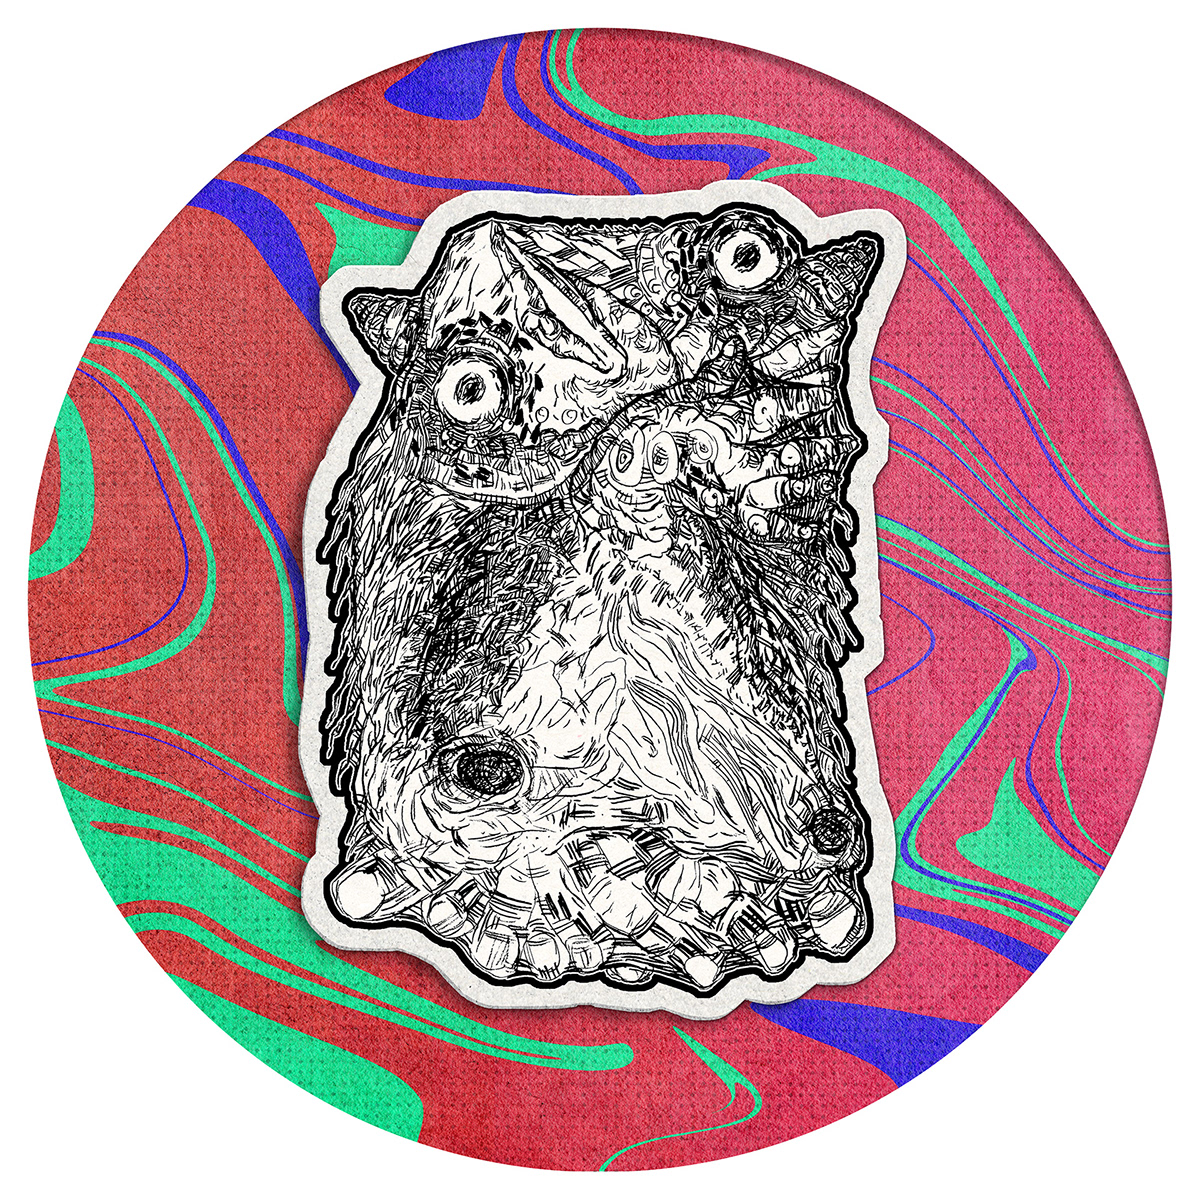 An odd demon character is drawn with intricate graphite lines placed on a psychedelic liquid circle.